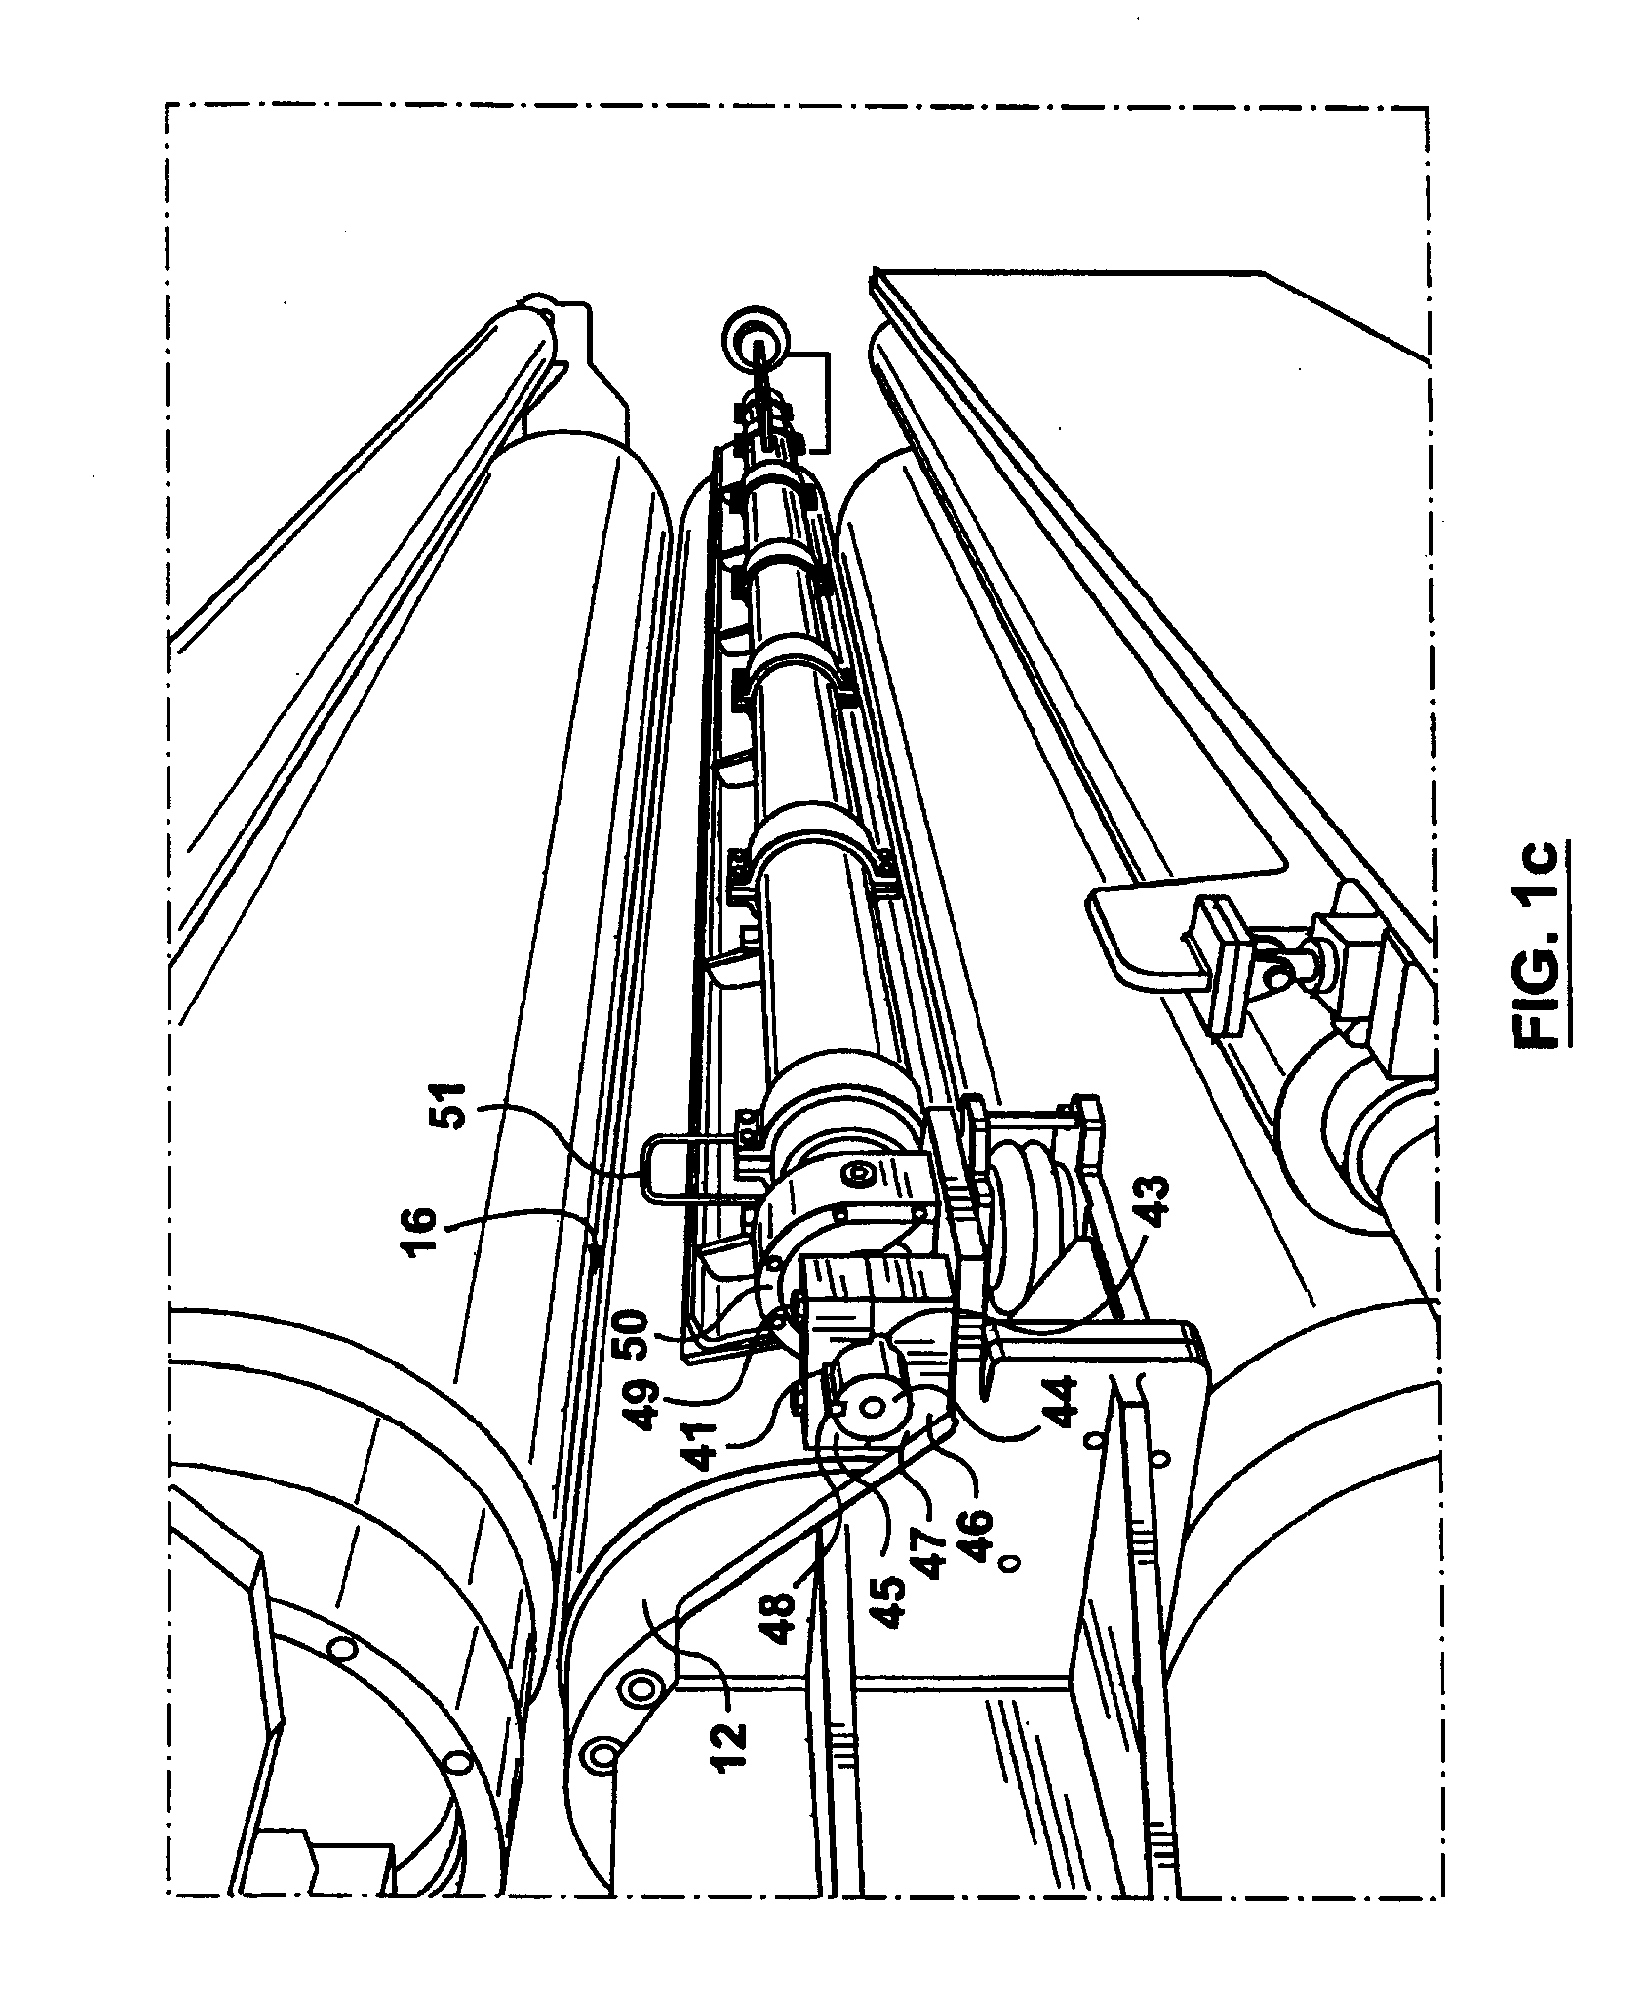 Roll cleaning apparatus and method